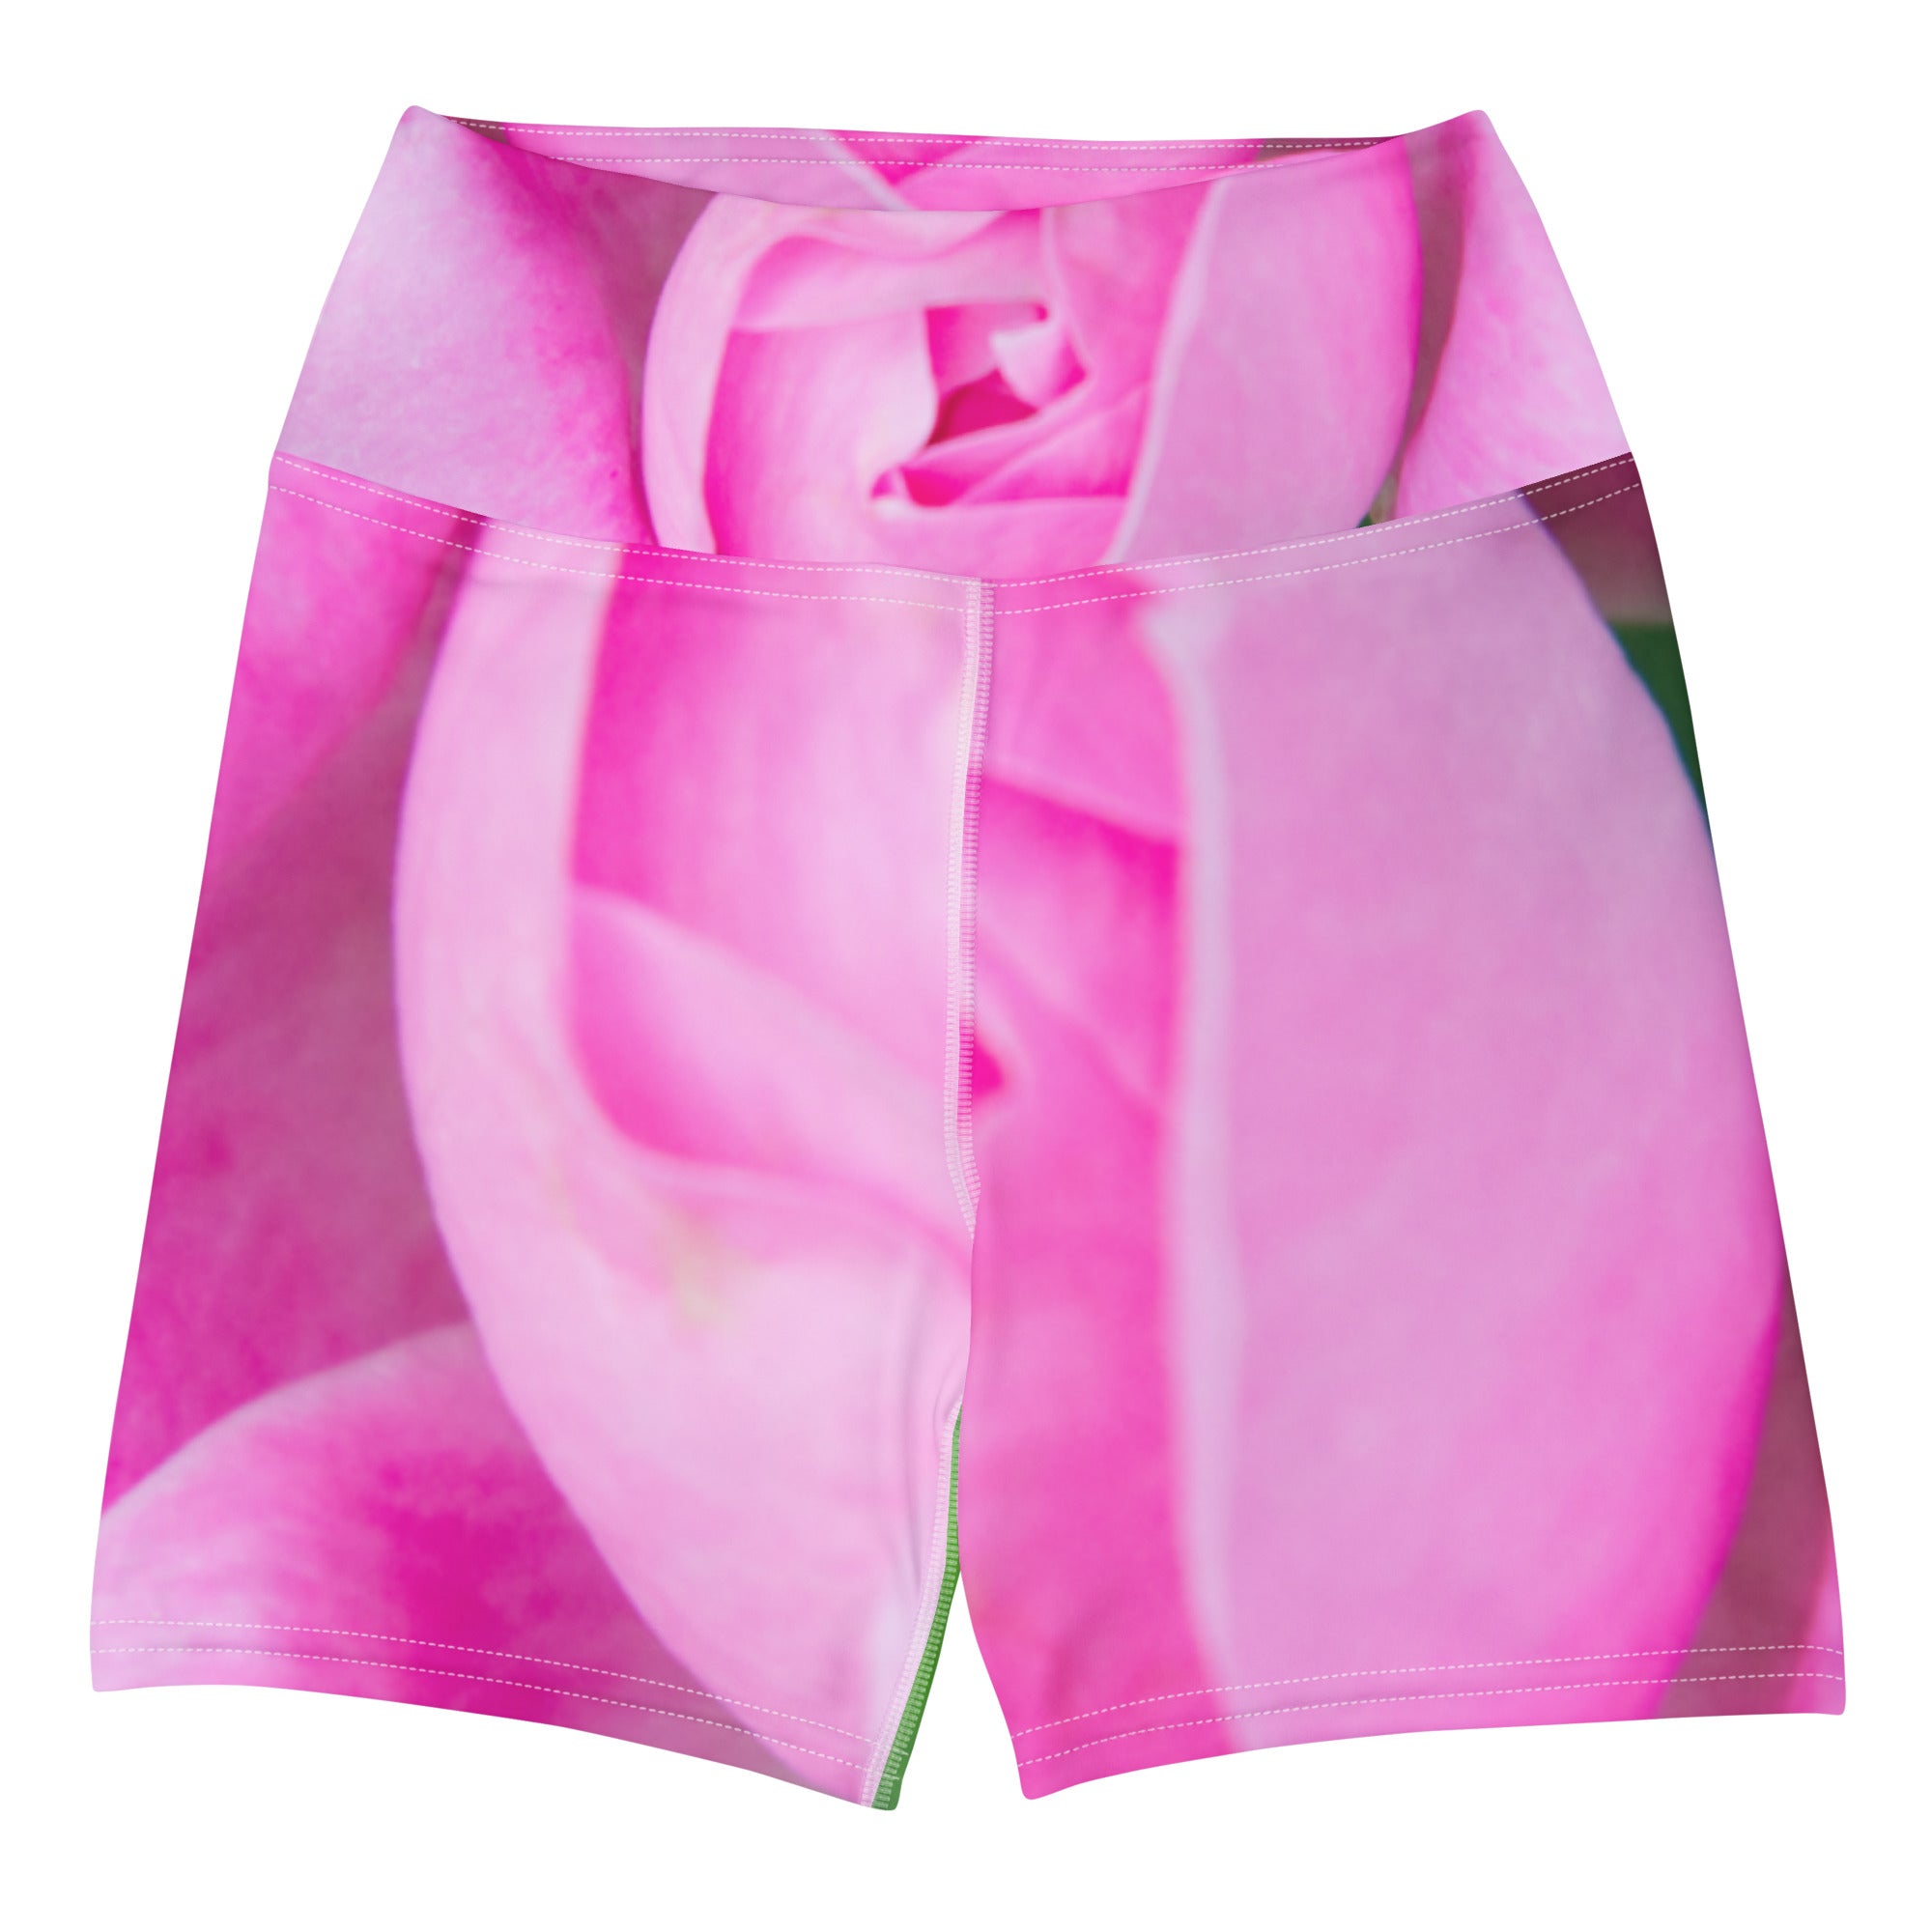 In the Pink of Rose Yoga Shorts